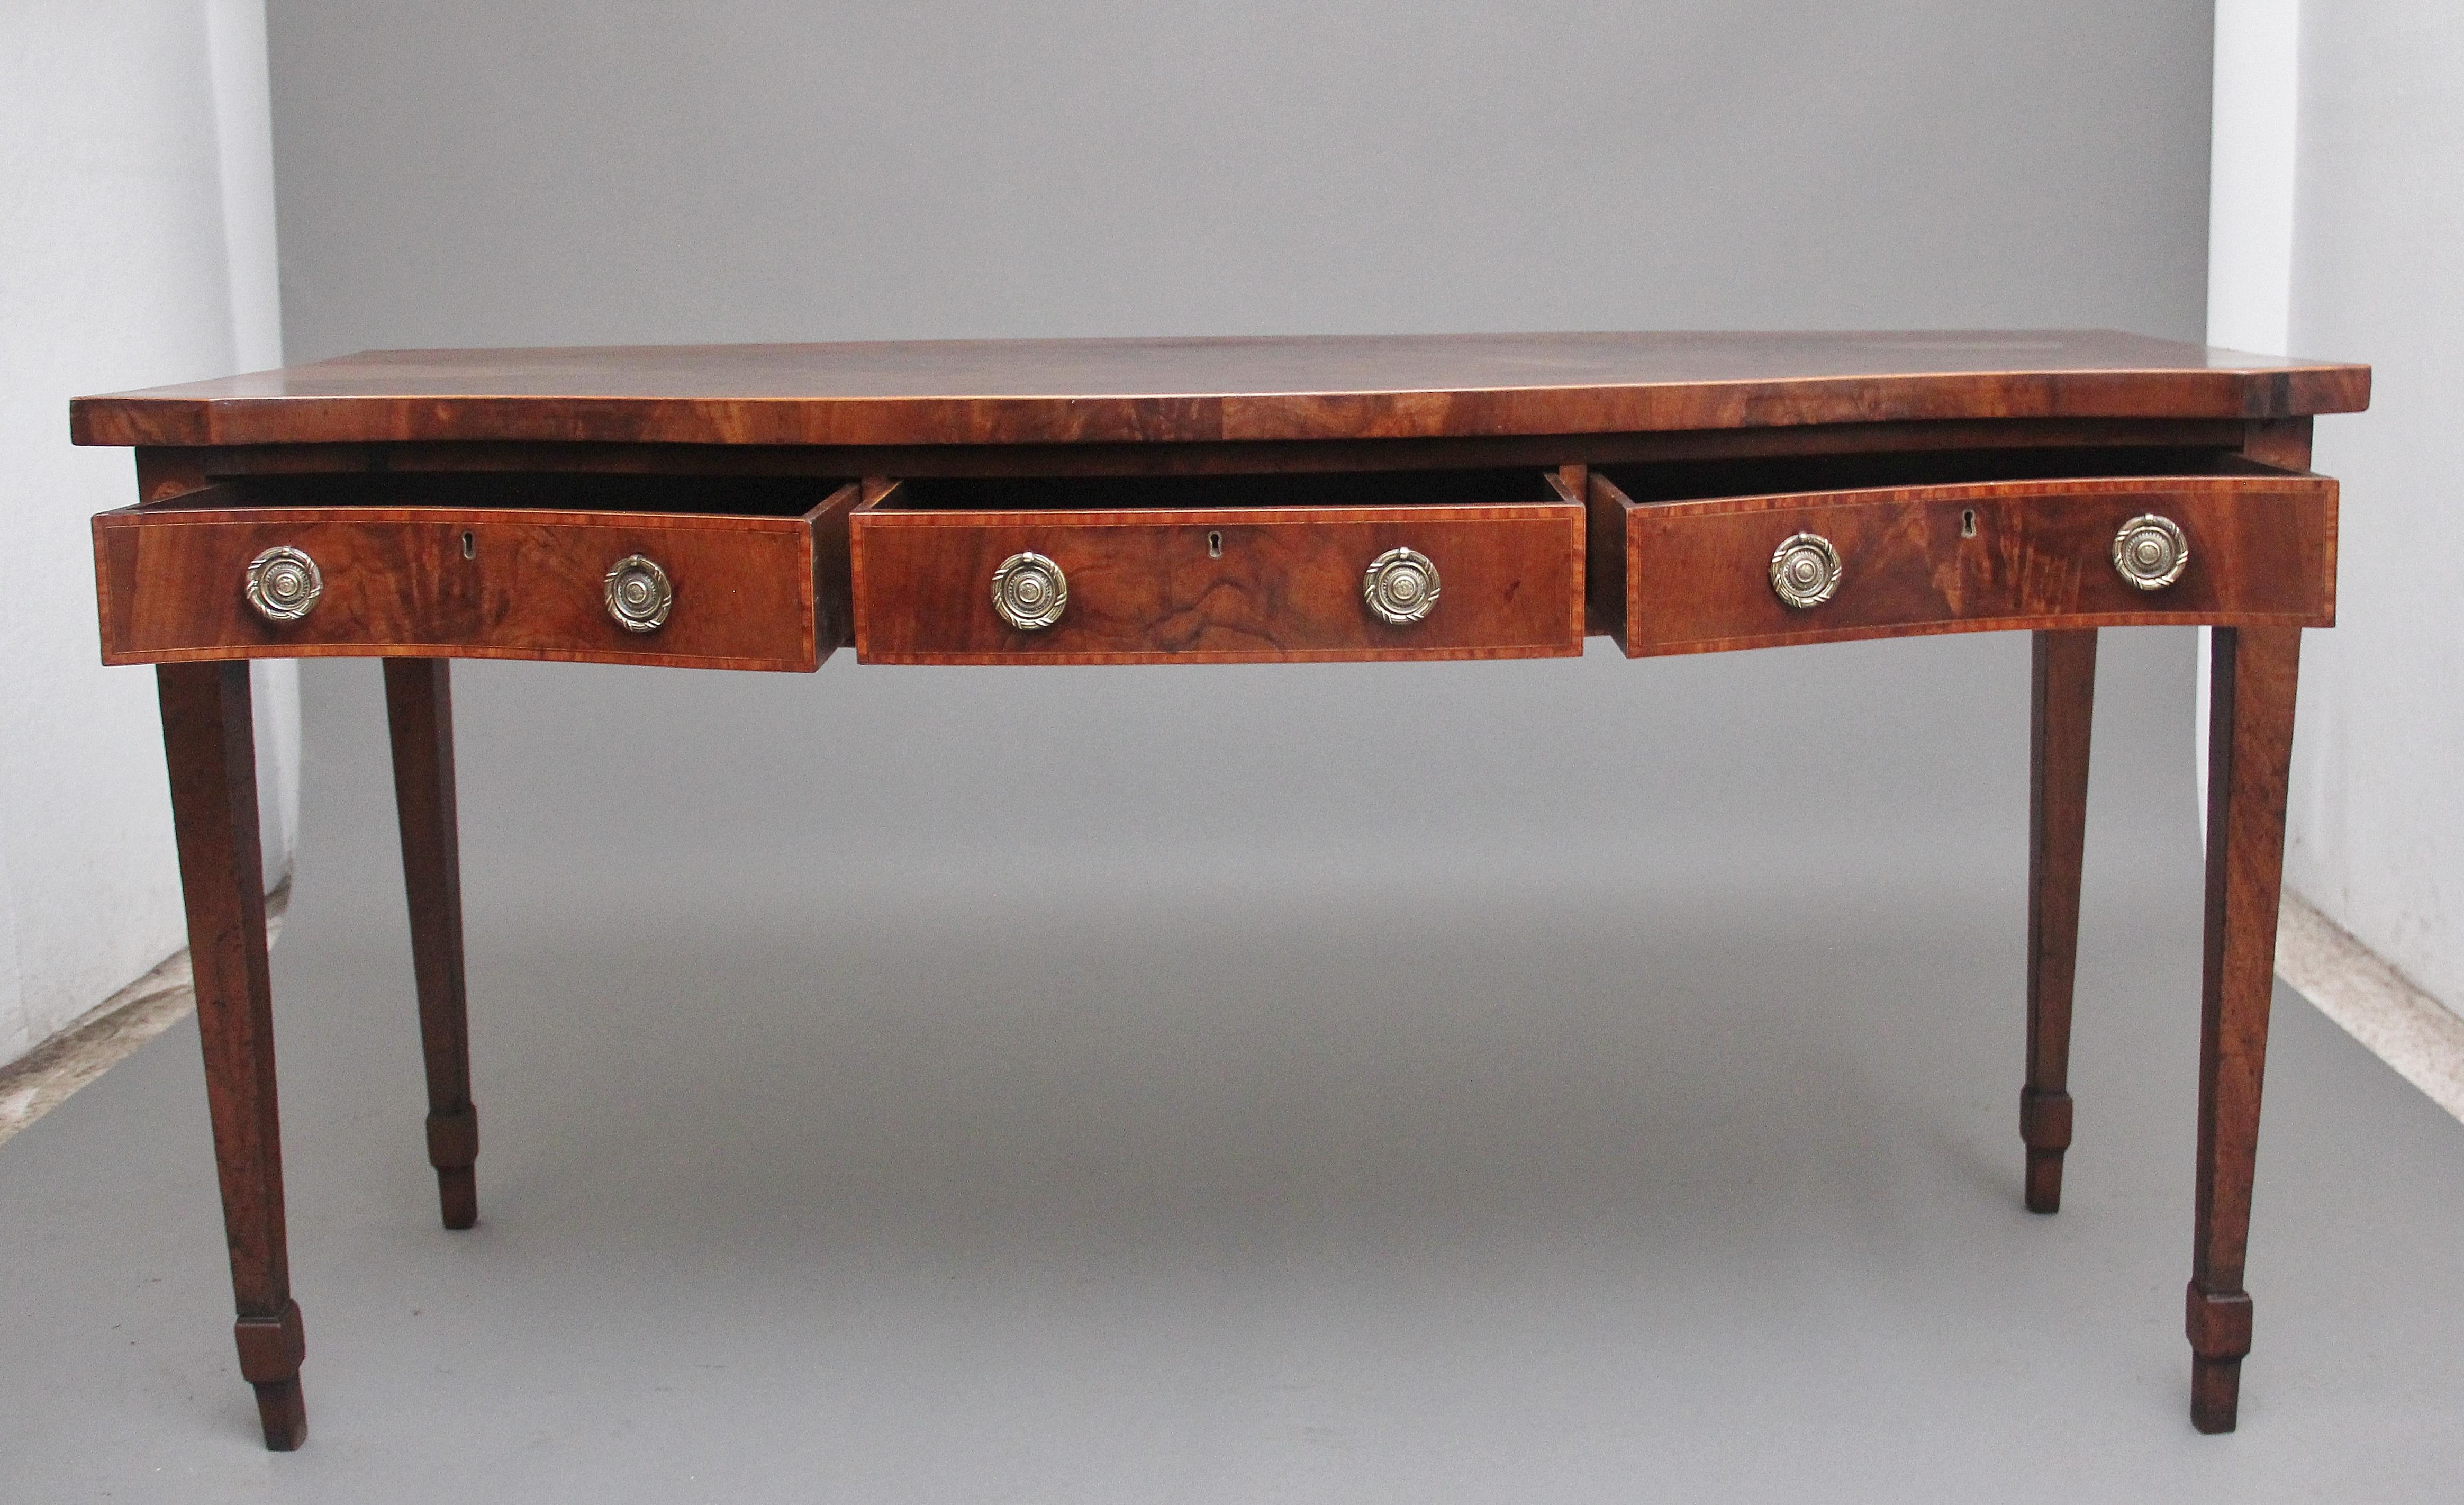 A superb quality early 19th century mahogany serpentine serving table, having a wonderfully figured shaped top with boxwood stringing along the edge above three drawers with the original brass ring handles, crossbanding on the drawer fronts, having